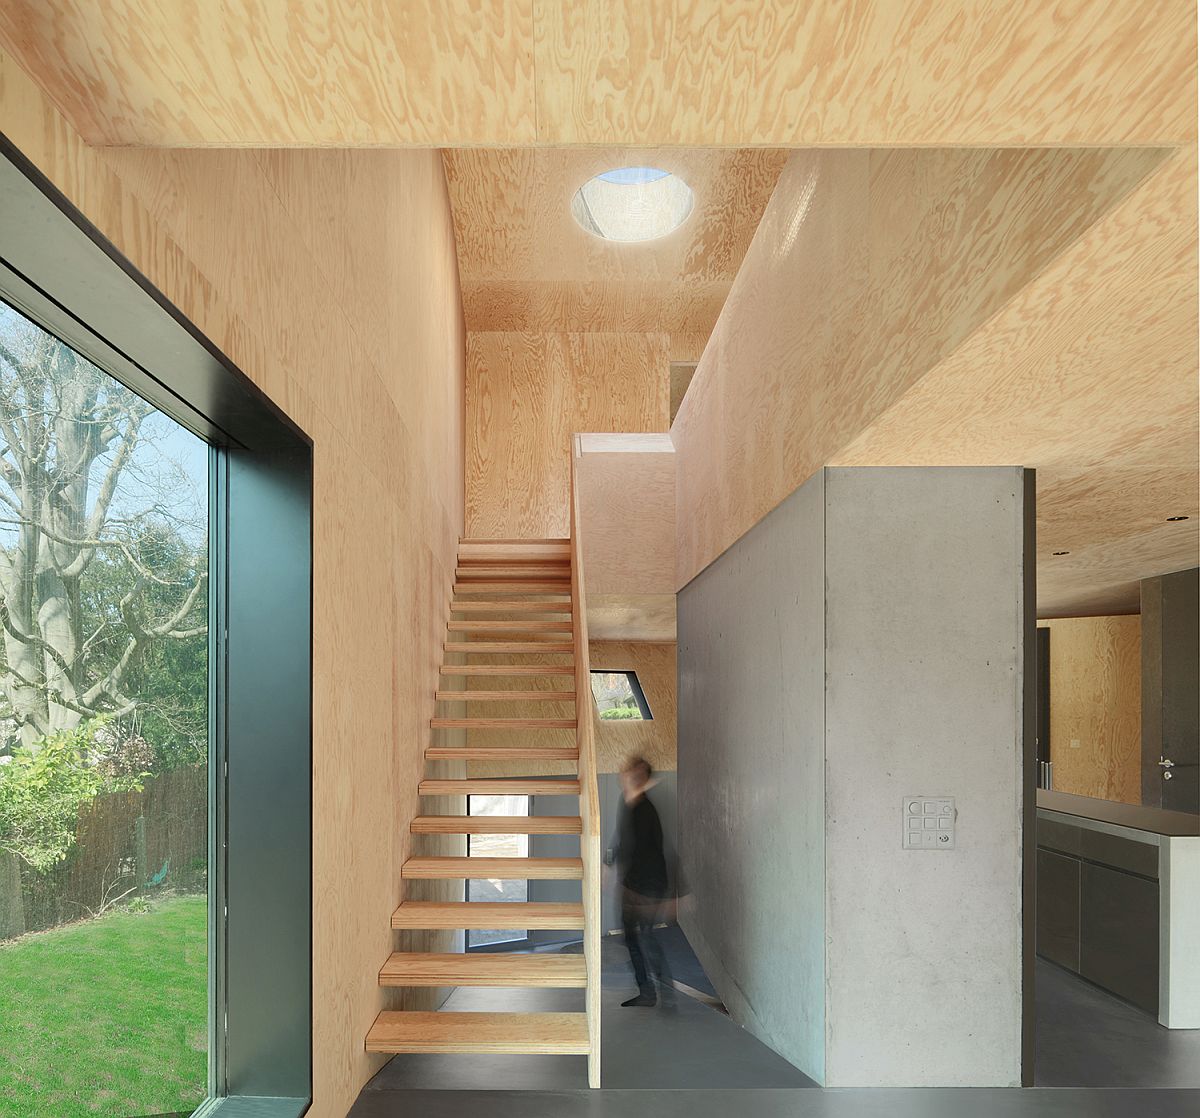 Wood and concrete interior of the house that is modern and minimal